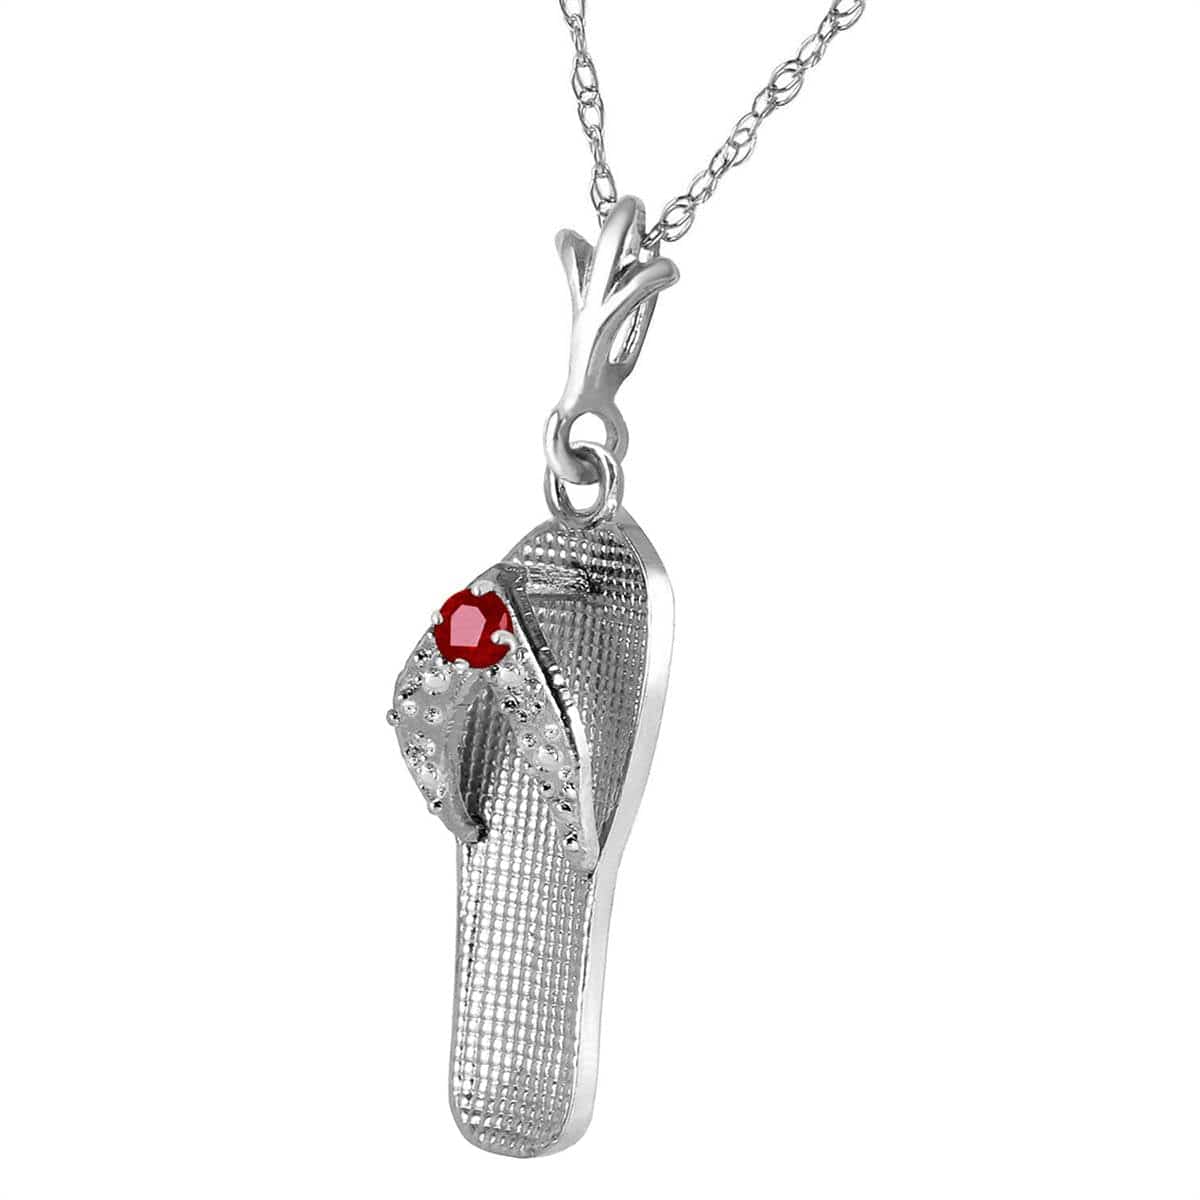 0.02 Carat 14K Solid White Gold Shoes Necklace Natural Diamond